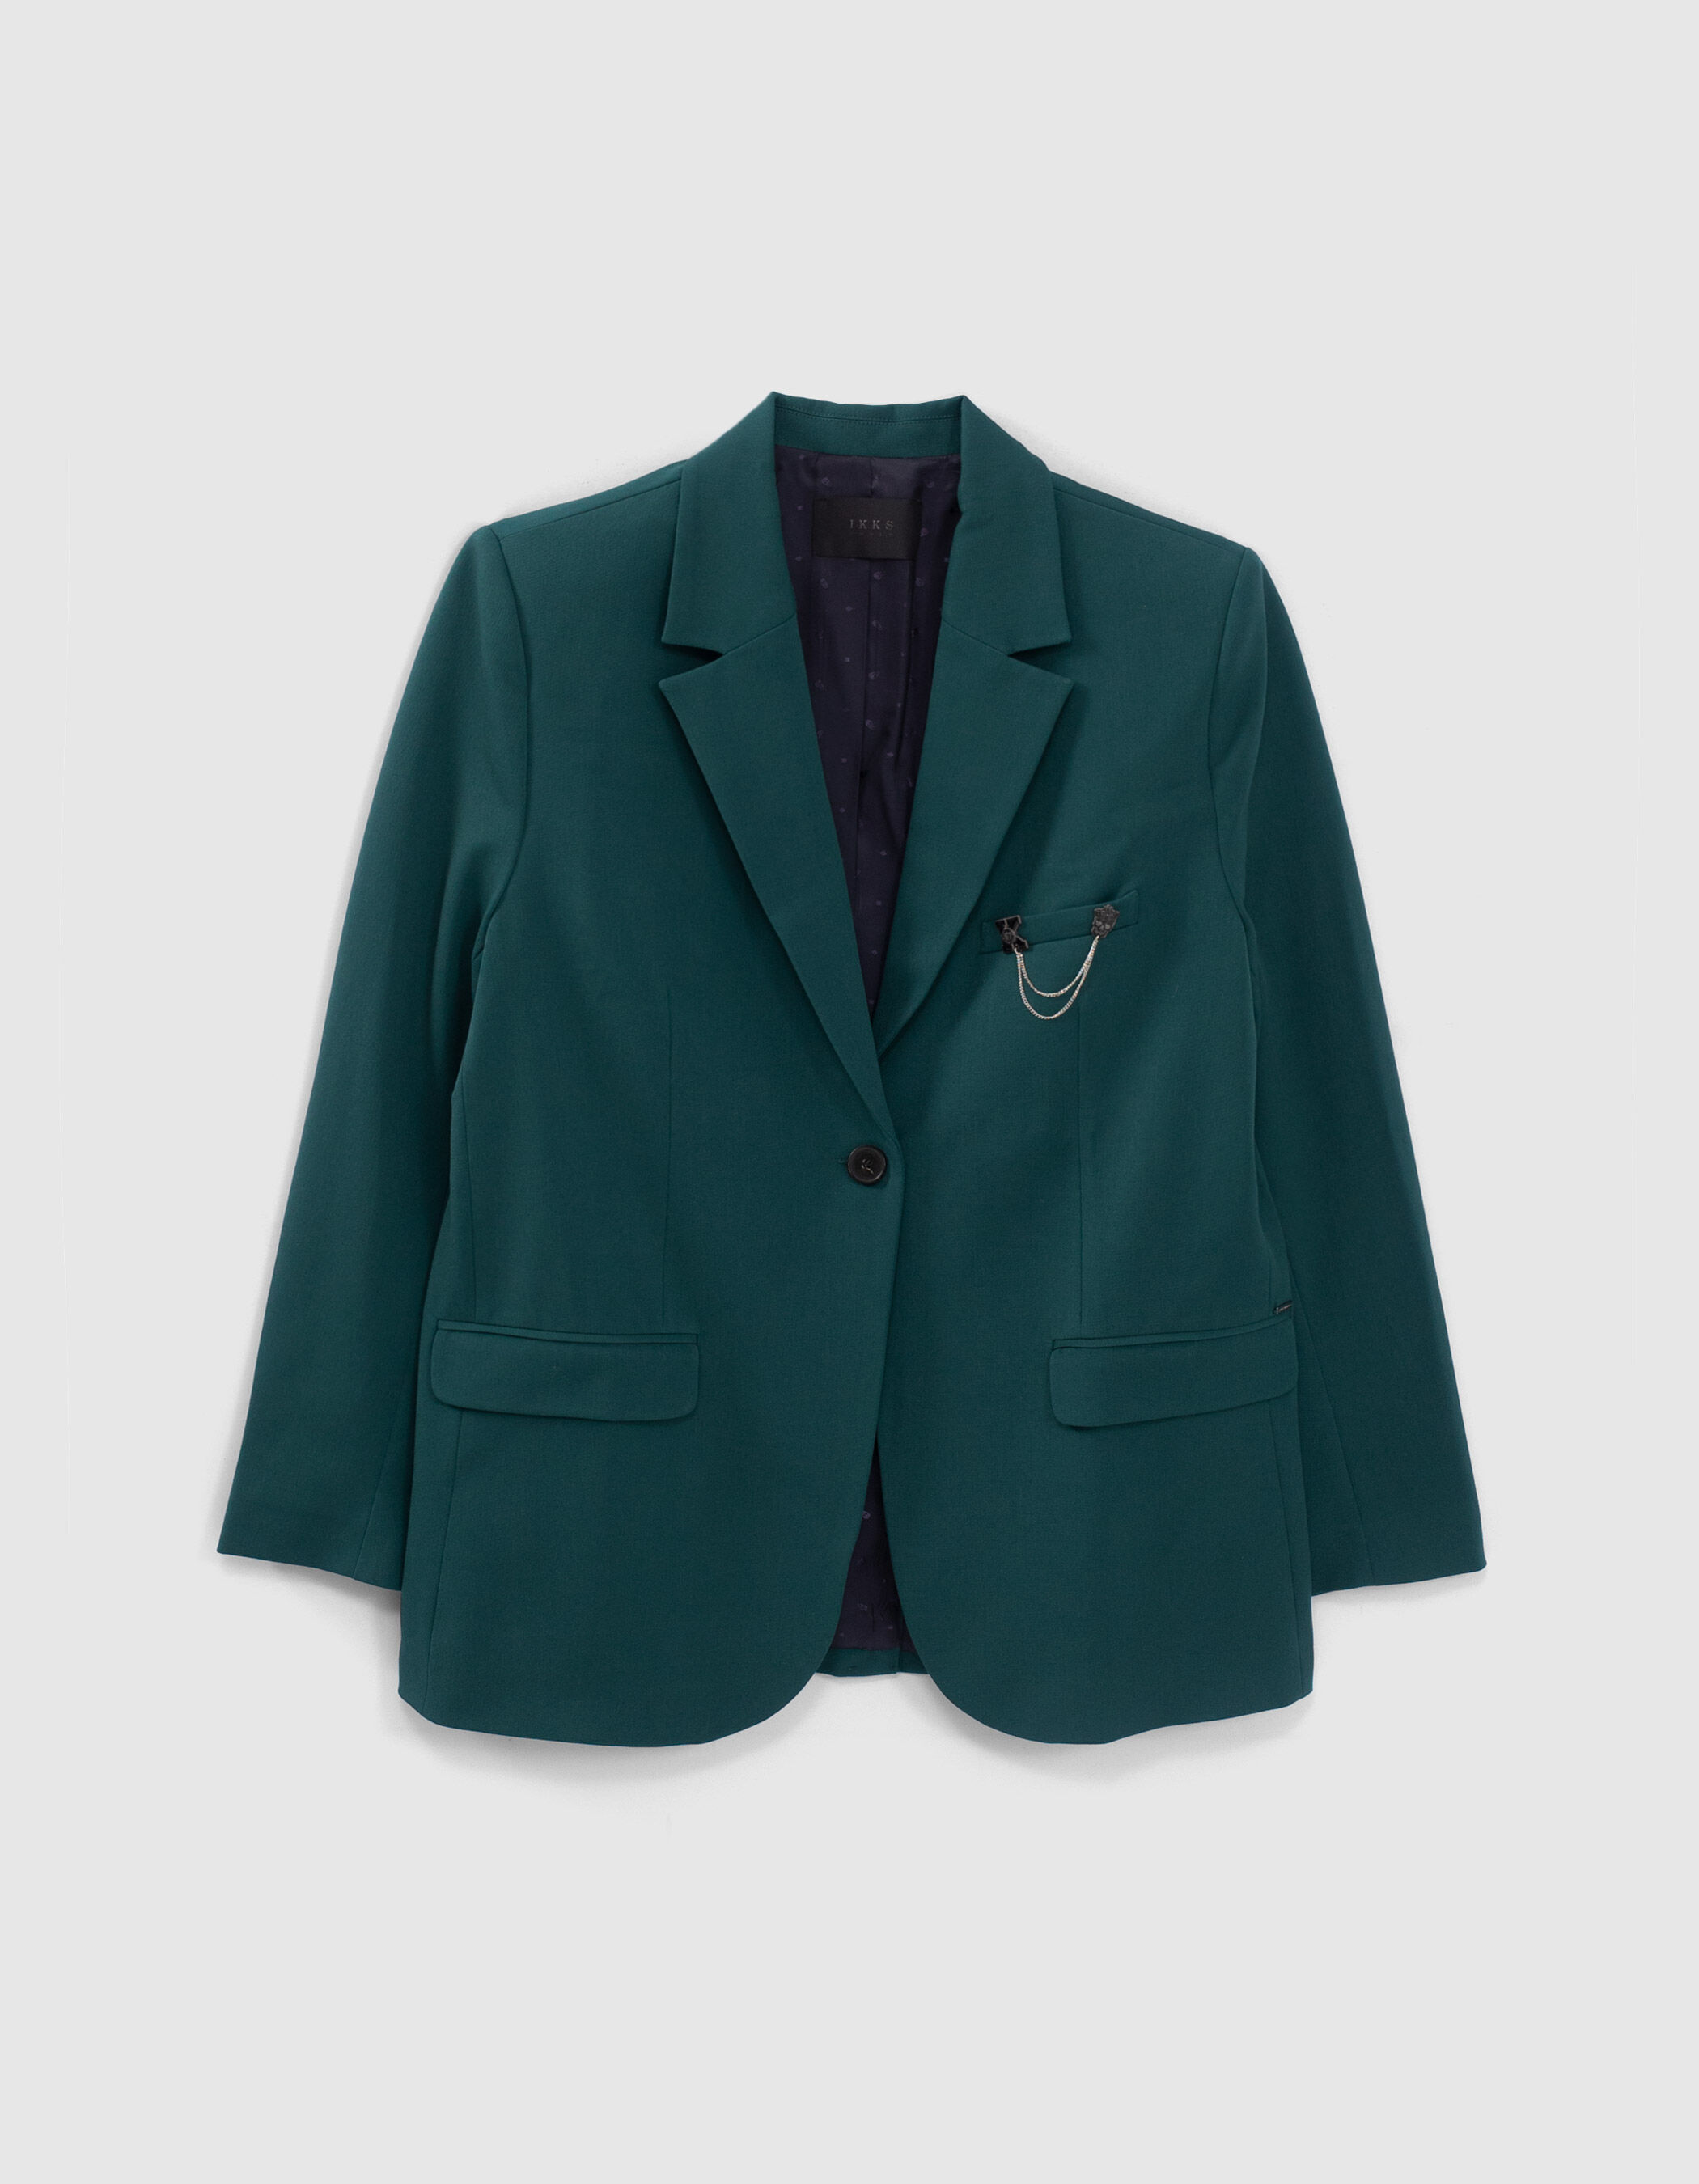 Women's duck green suit jacket with pin badge